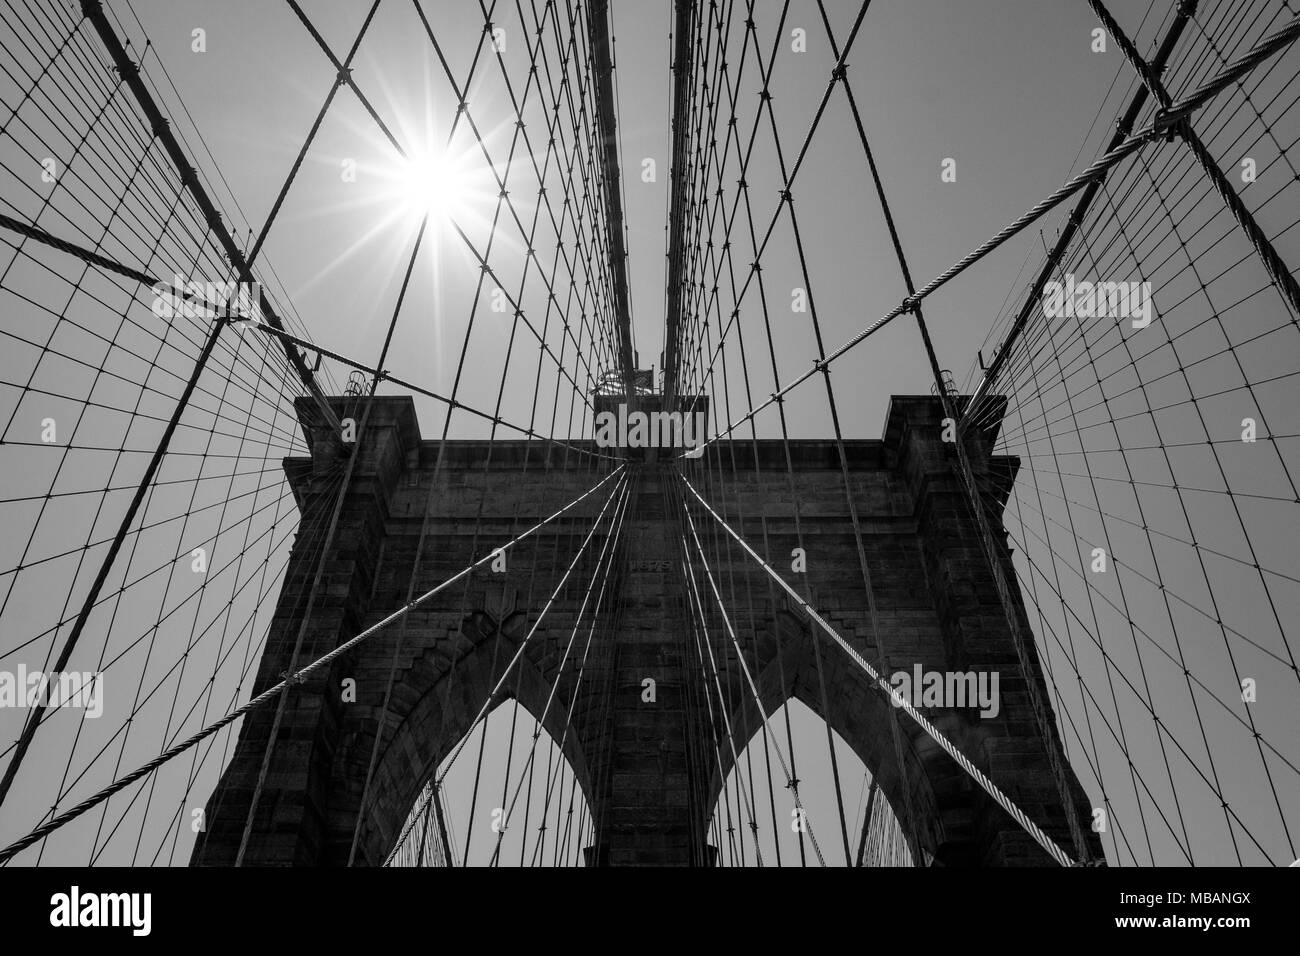 Details of the brooklyn bridge and the sun in black and white Stock Photo